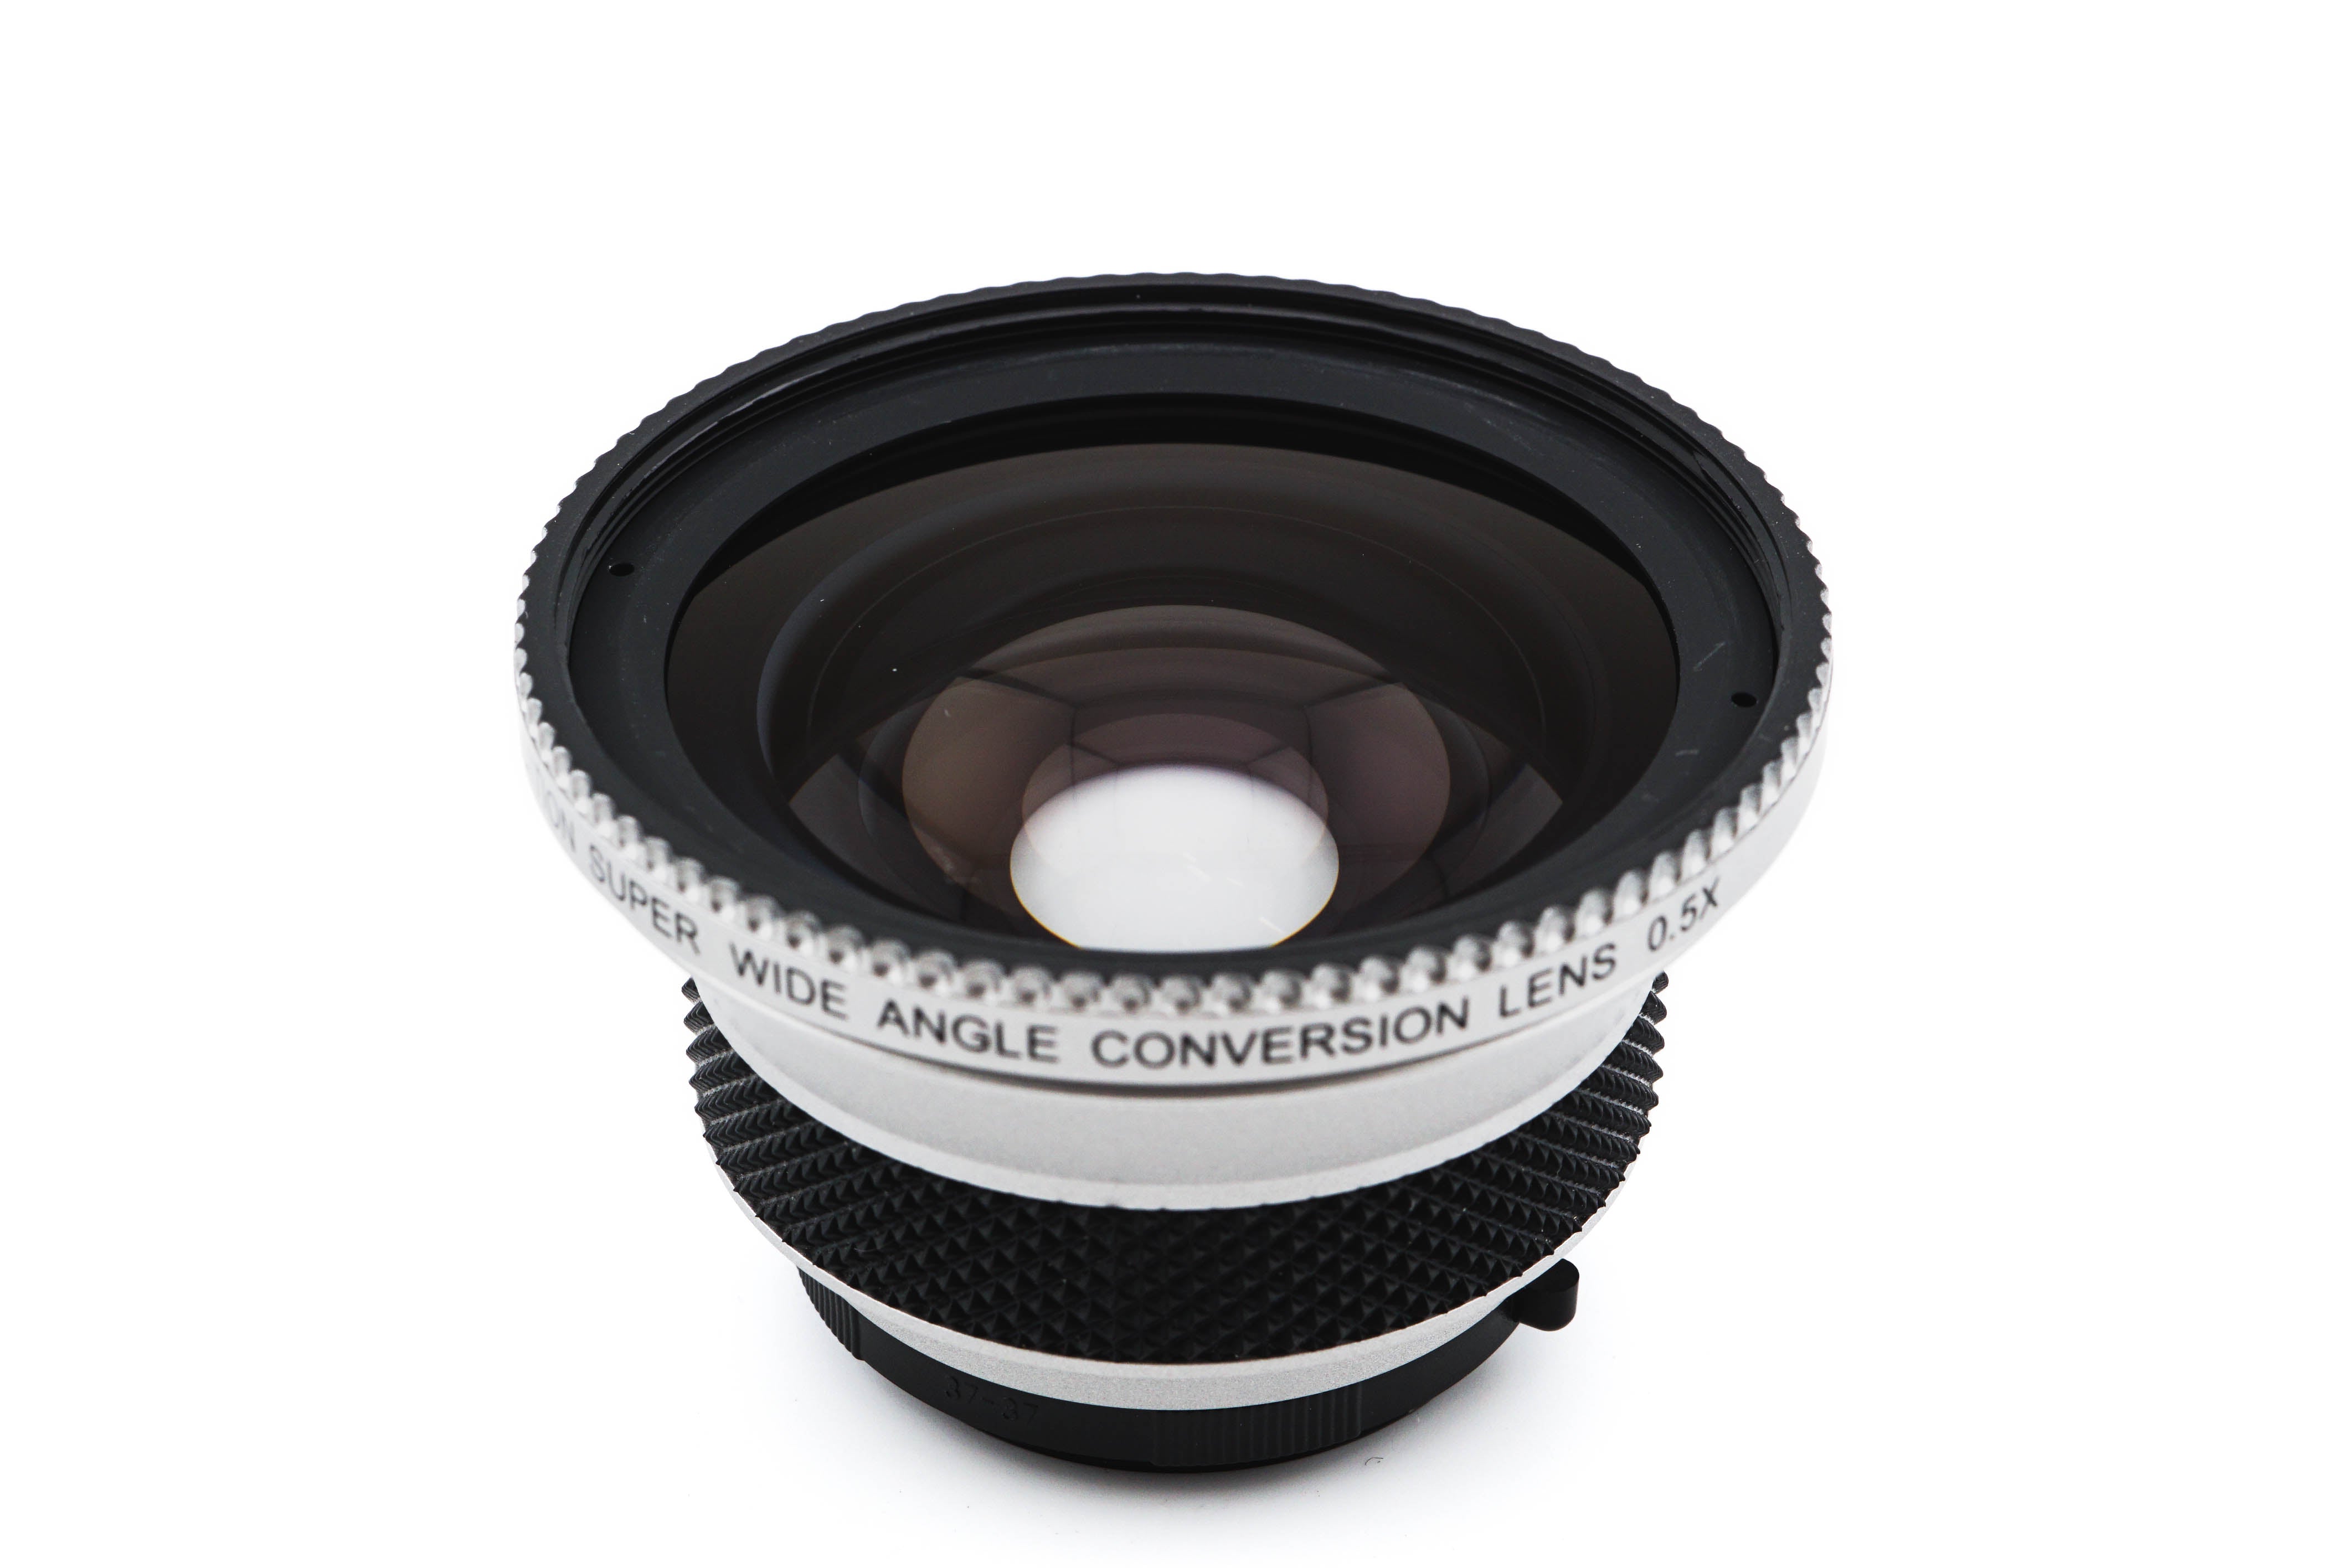 Raynox 0.5x High Definition Super Wide Angle Conversion Lens